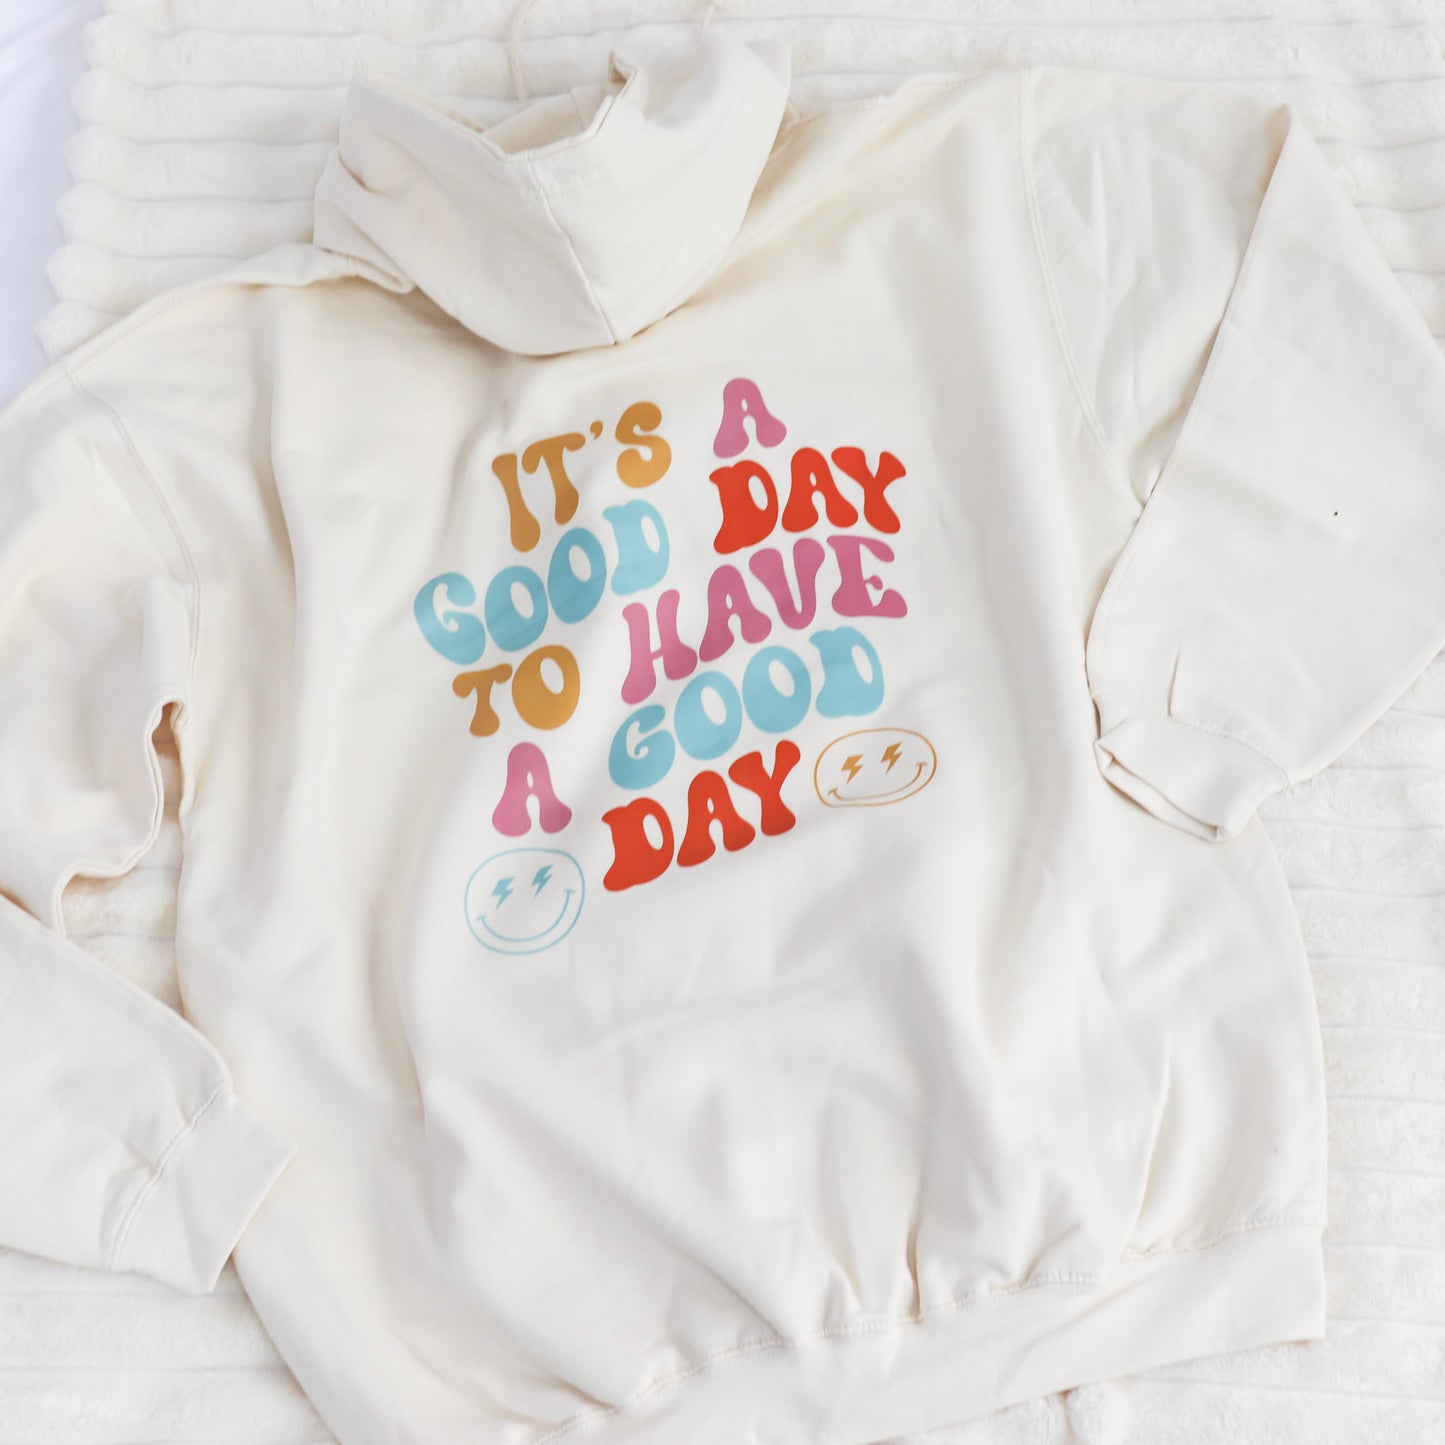 It's a Good Day to Have a Good Day Unisex Adults Hoodie